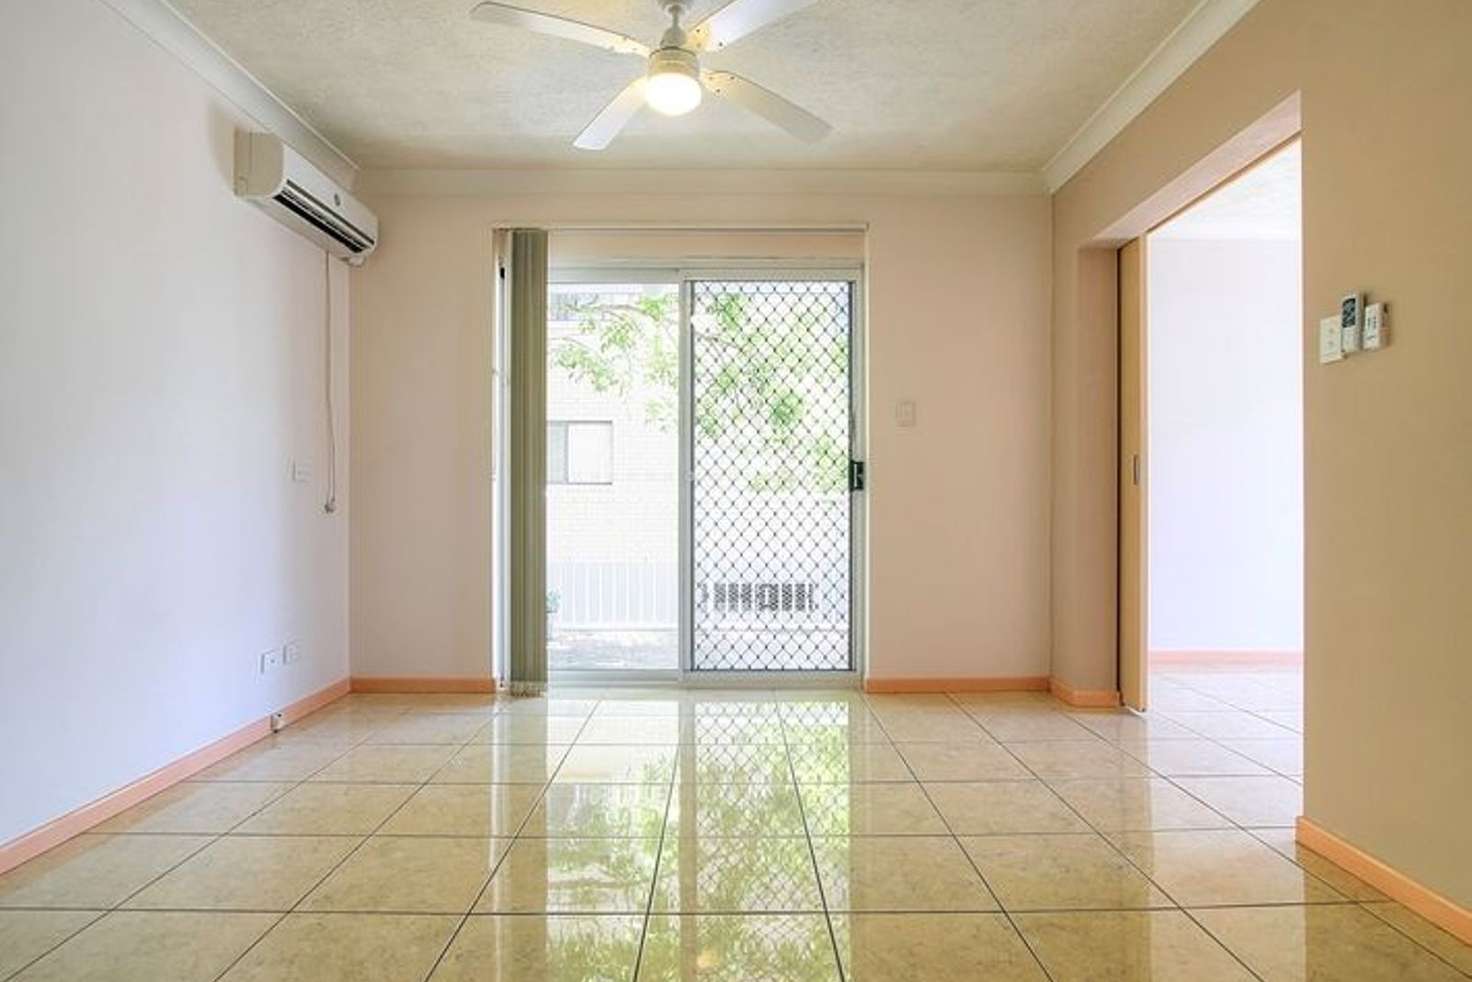 Main view of Homely apartment listing, 6/25-27 Darrambal Street, Chevron Island QLD 4217